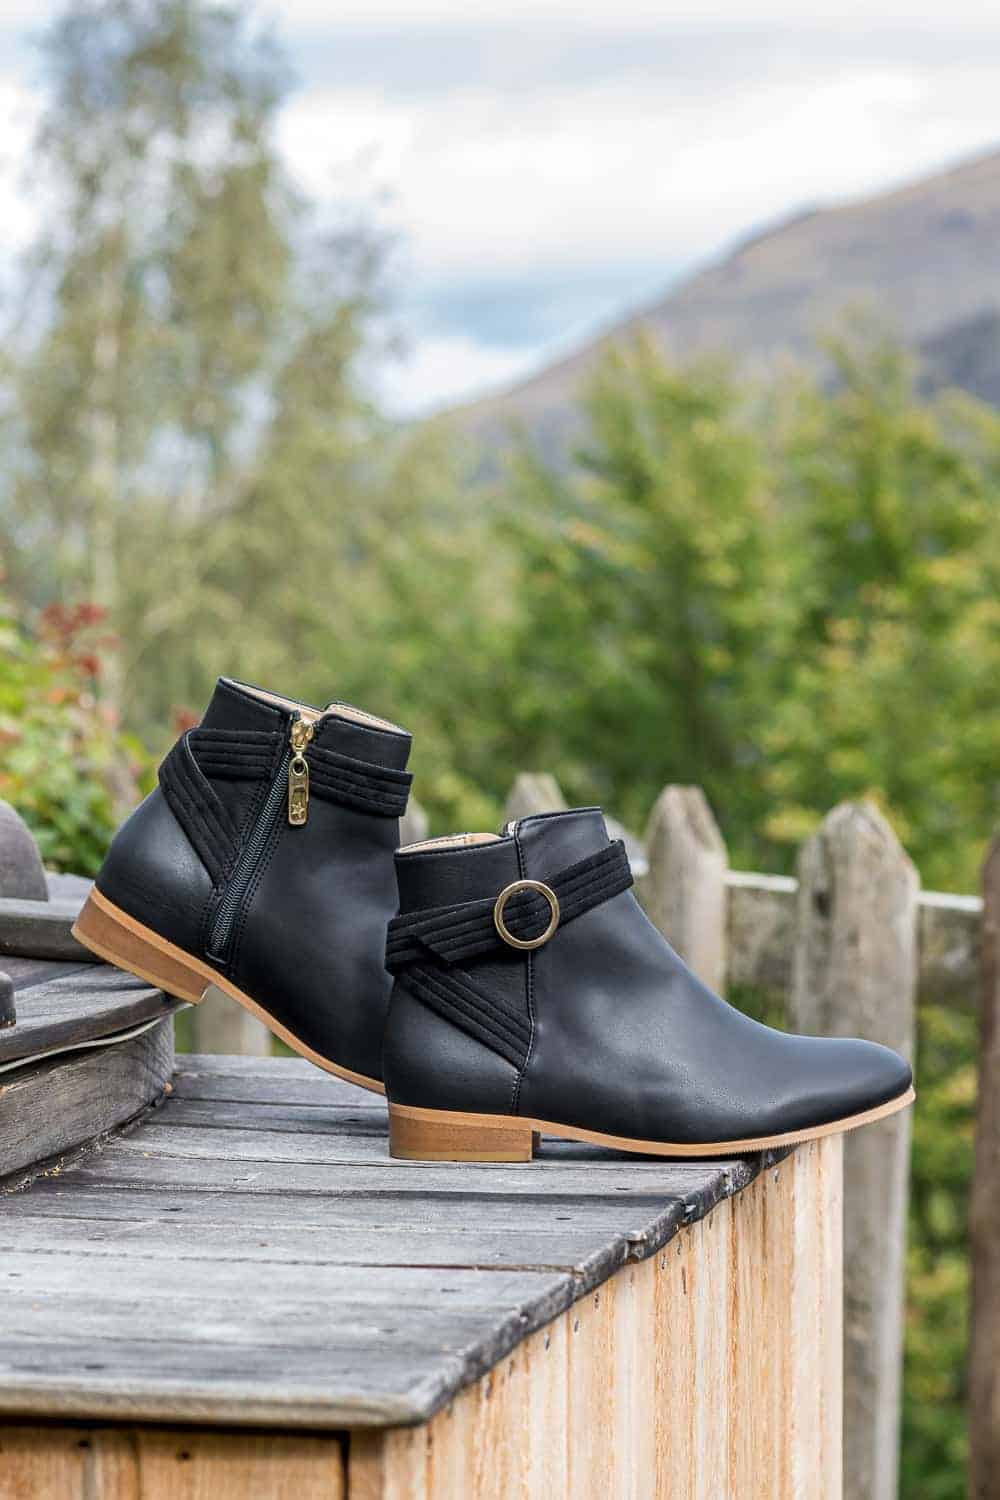 Flat black vegan leather ankle boots shown with decorative strap and round gold tone buckle on the side